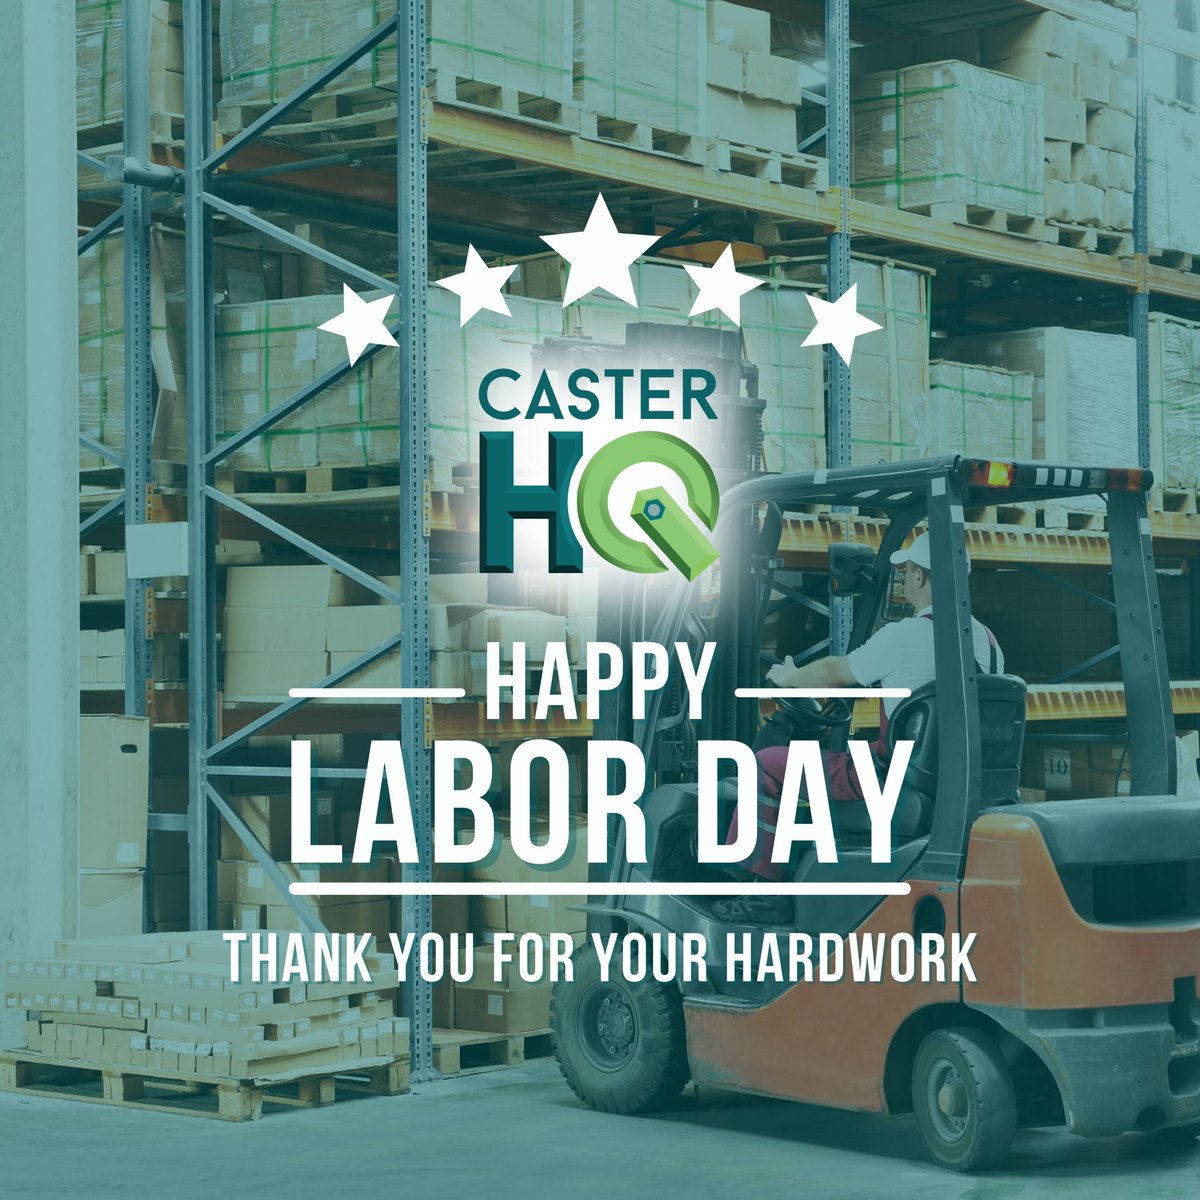 Here’s to the backbone of CasterHQ, our dedicated team. Thank you for your hard work, today and every day. Happy Labor Day! #CasterHQFamily #LaborDay2023